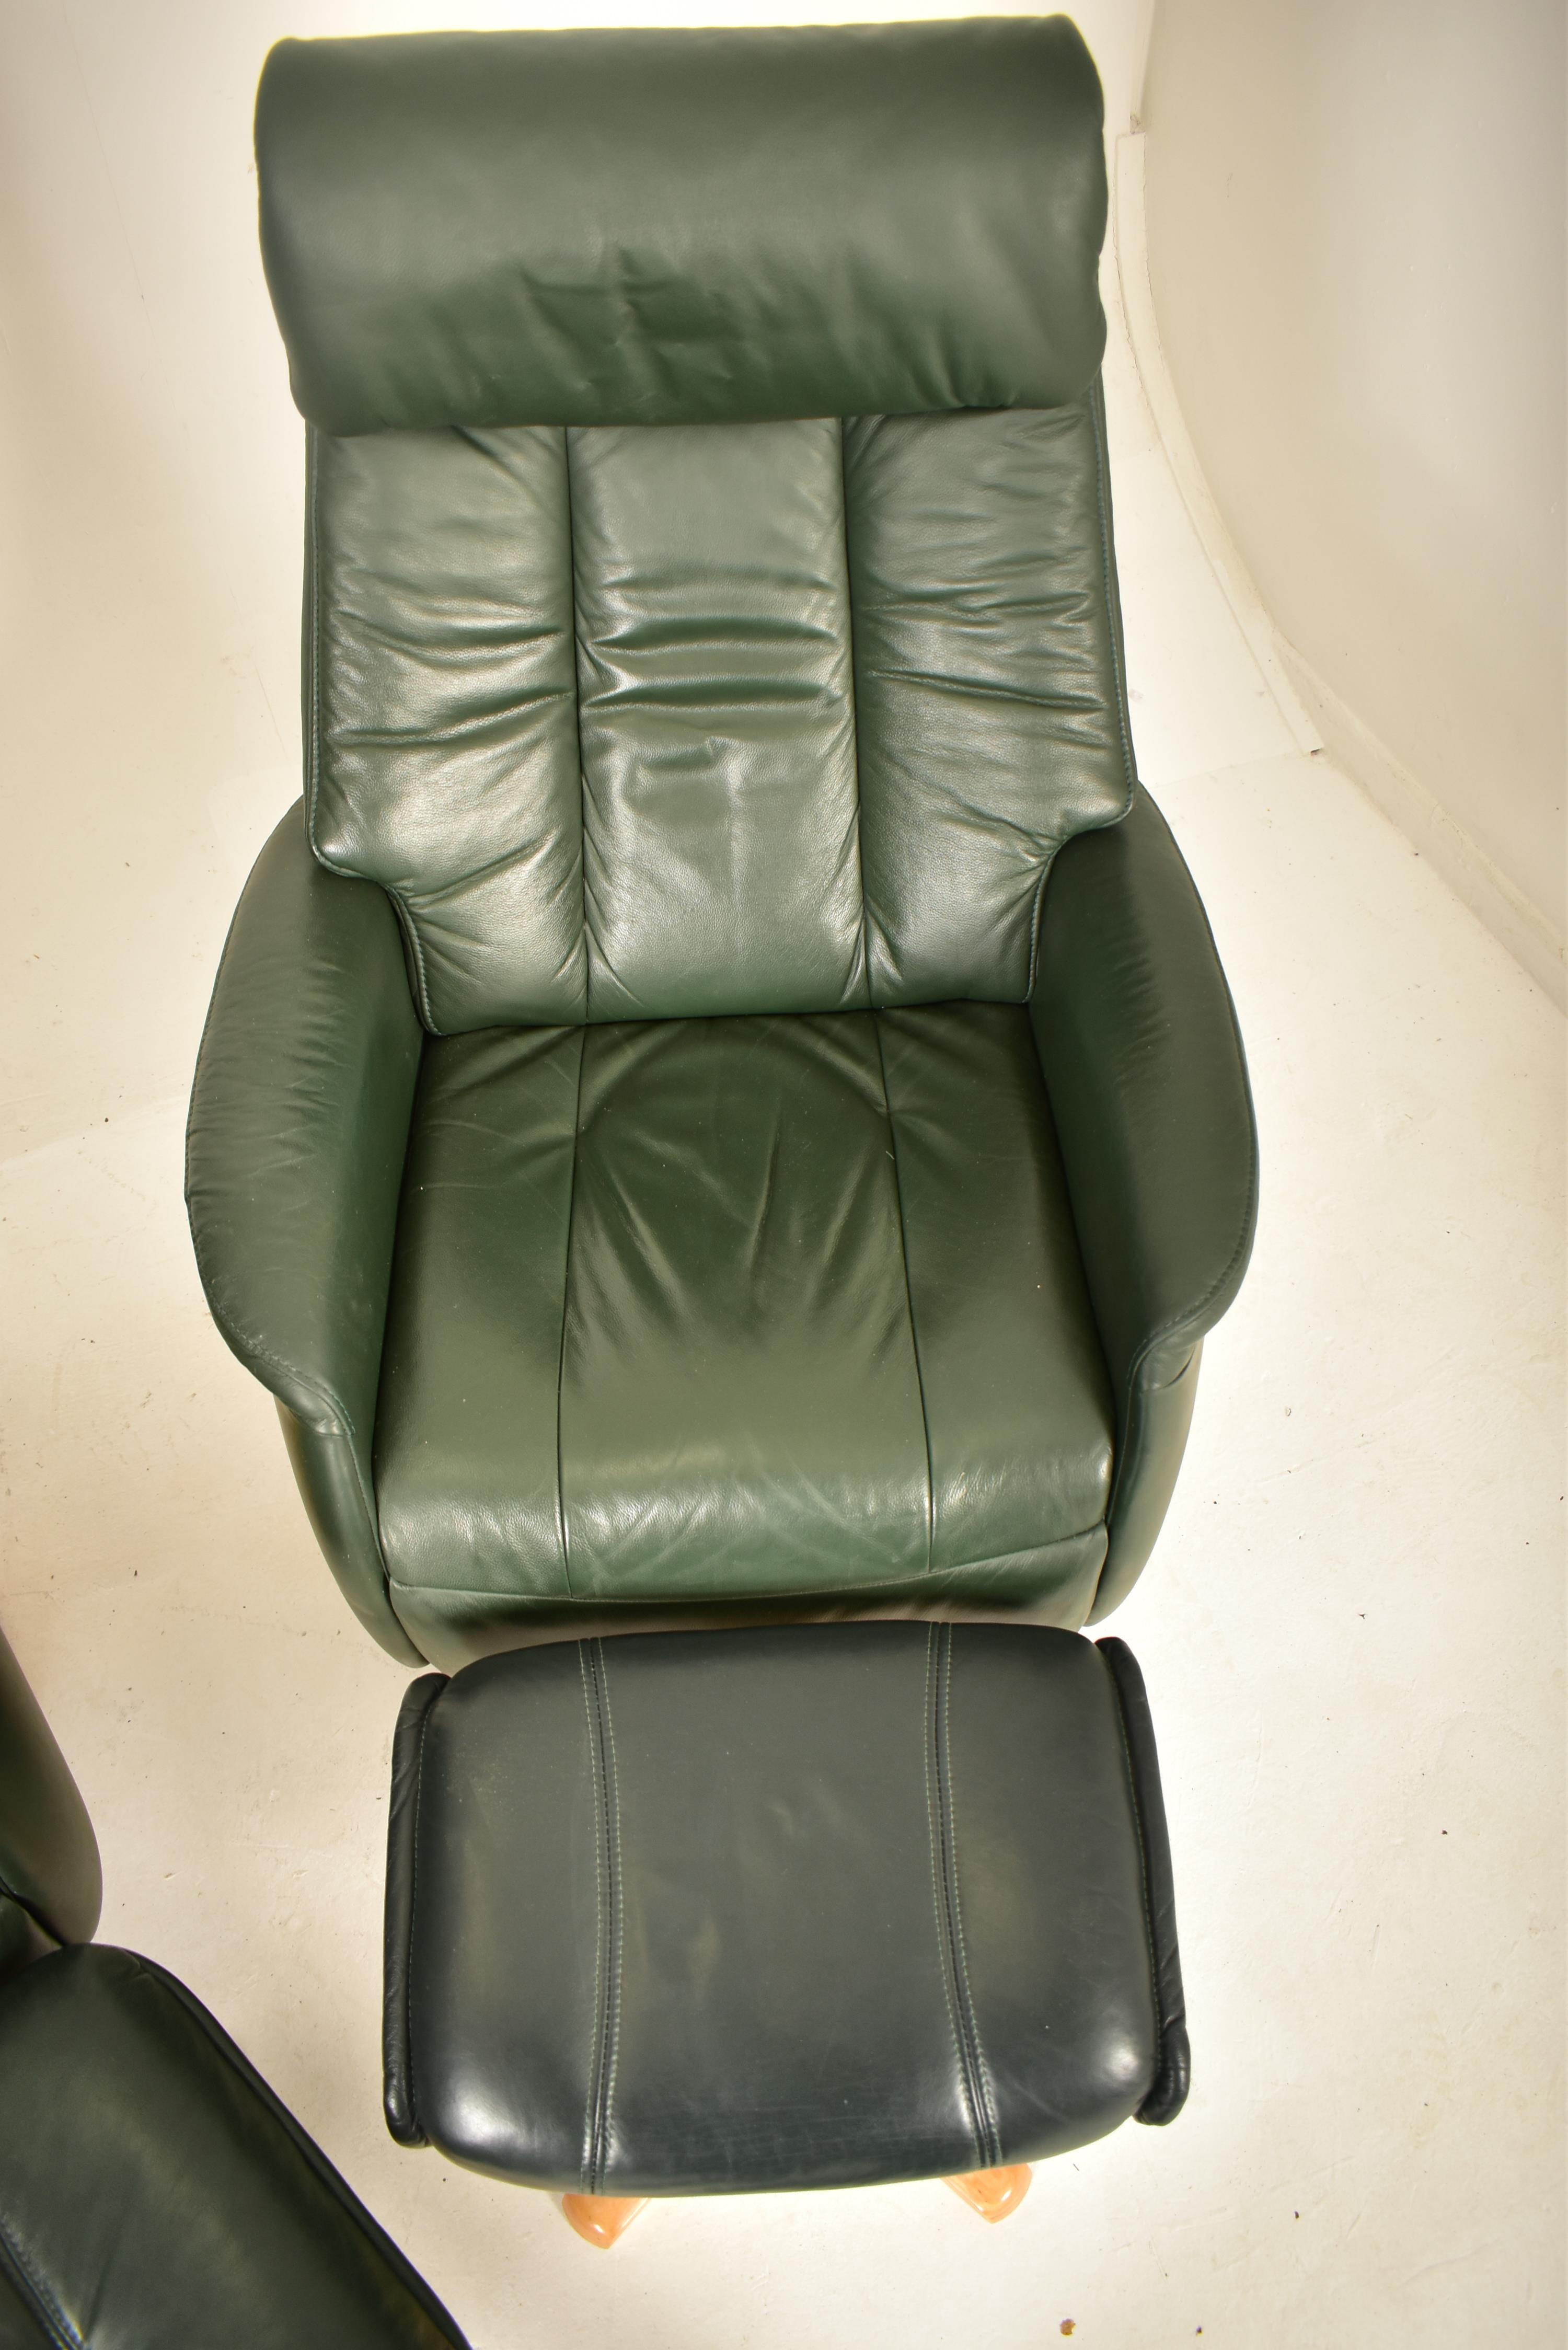 SITBEST - PAIR OF CONTEMPORARY SWIVEL RECLINING ARMCHAIRS - Image 2 of 7